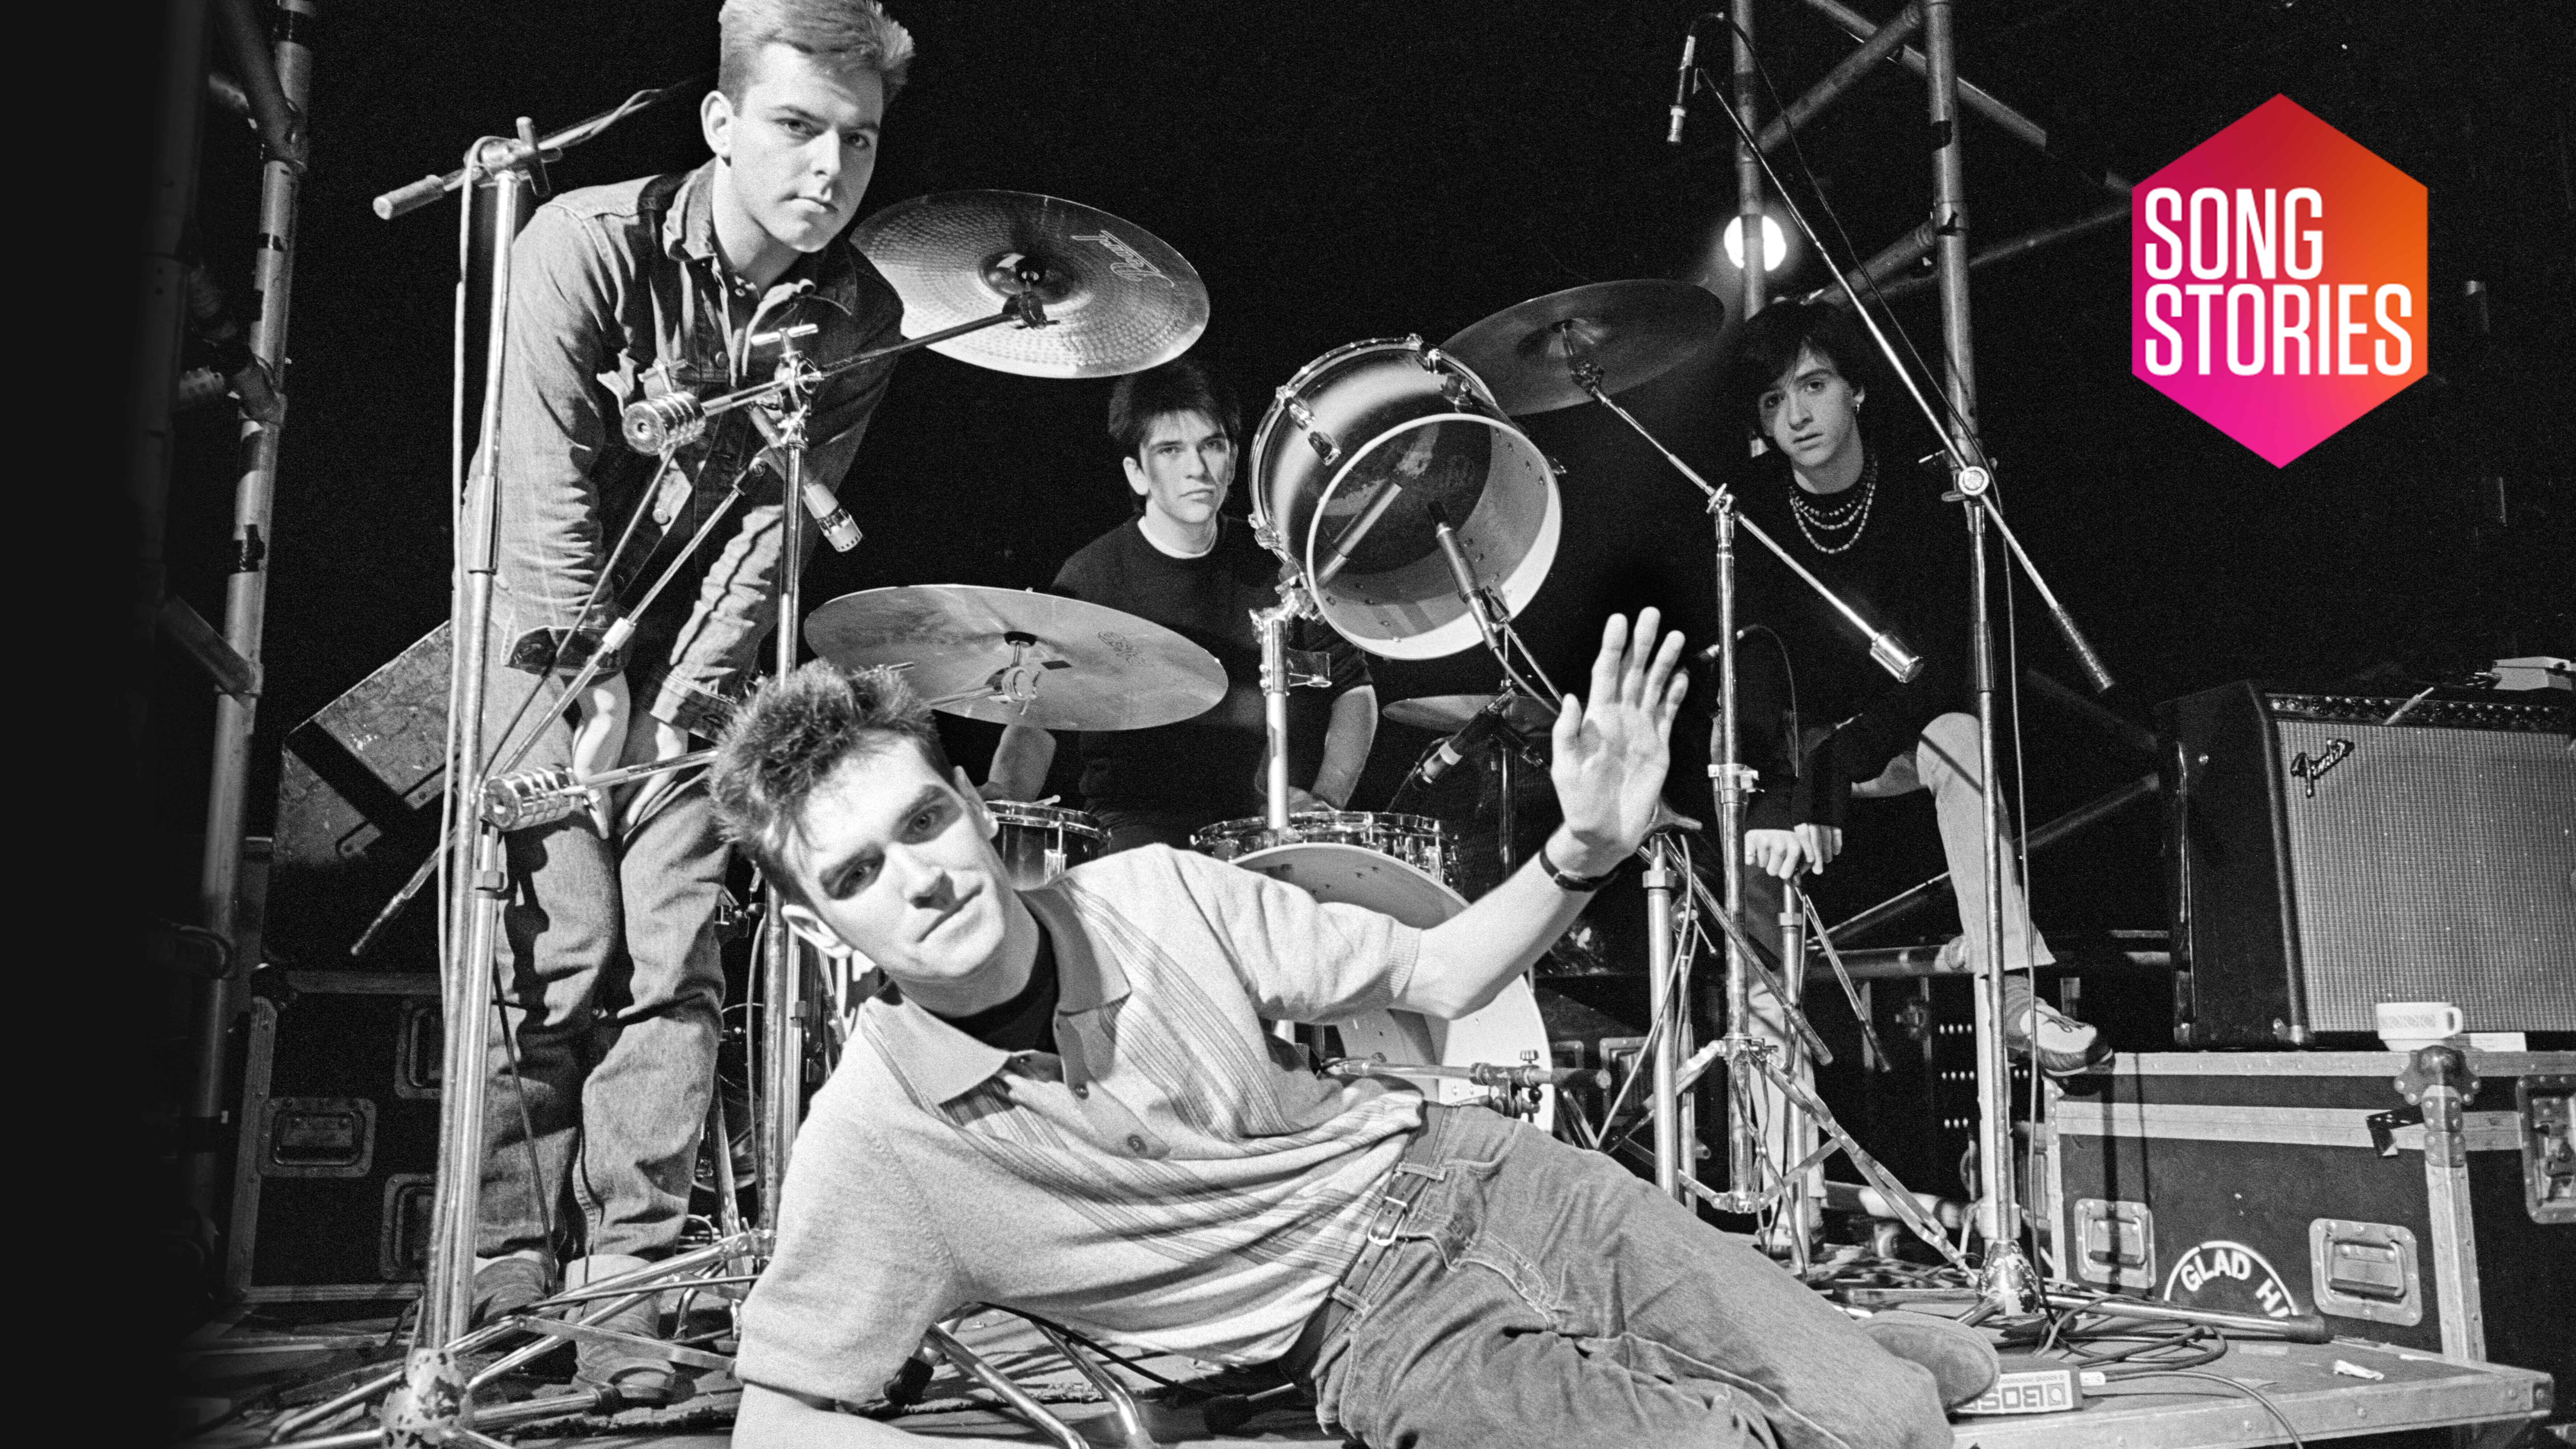 The Smiths - Heaven Knows I'm Miserable Now (Official Music Video